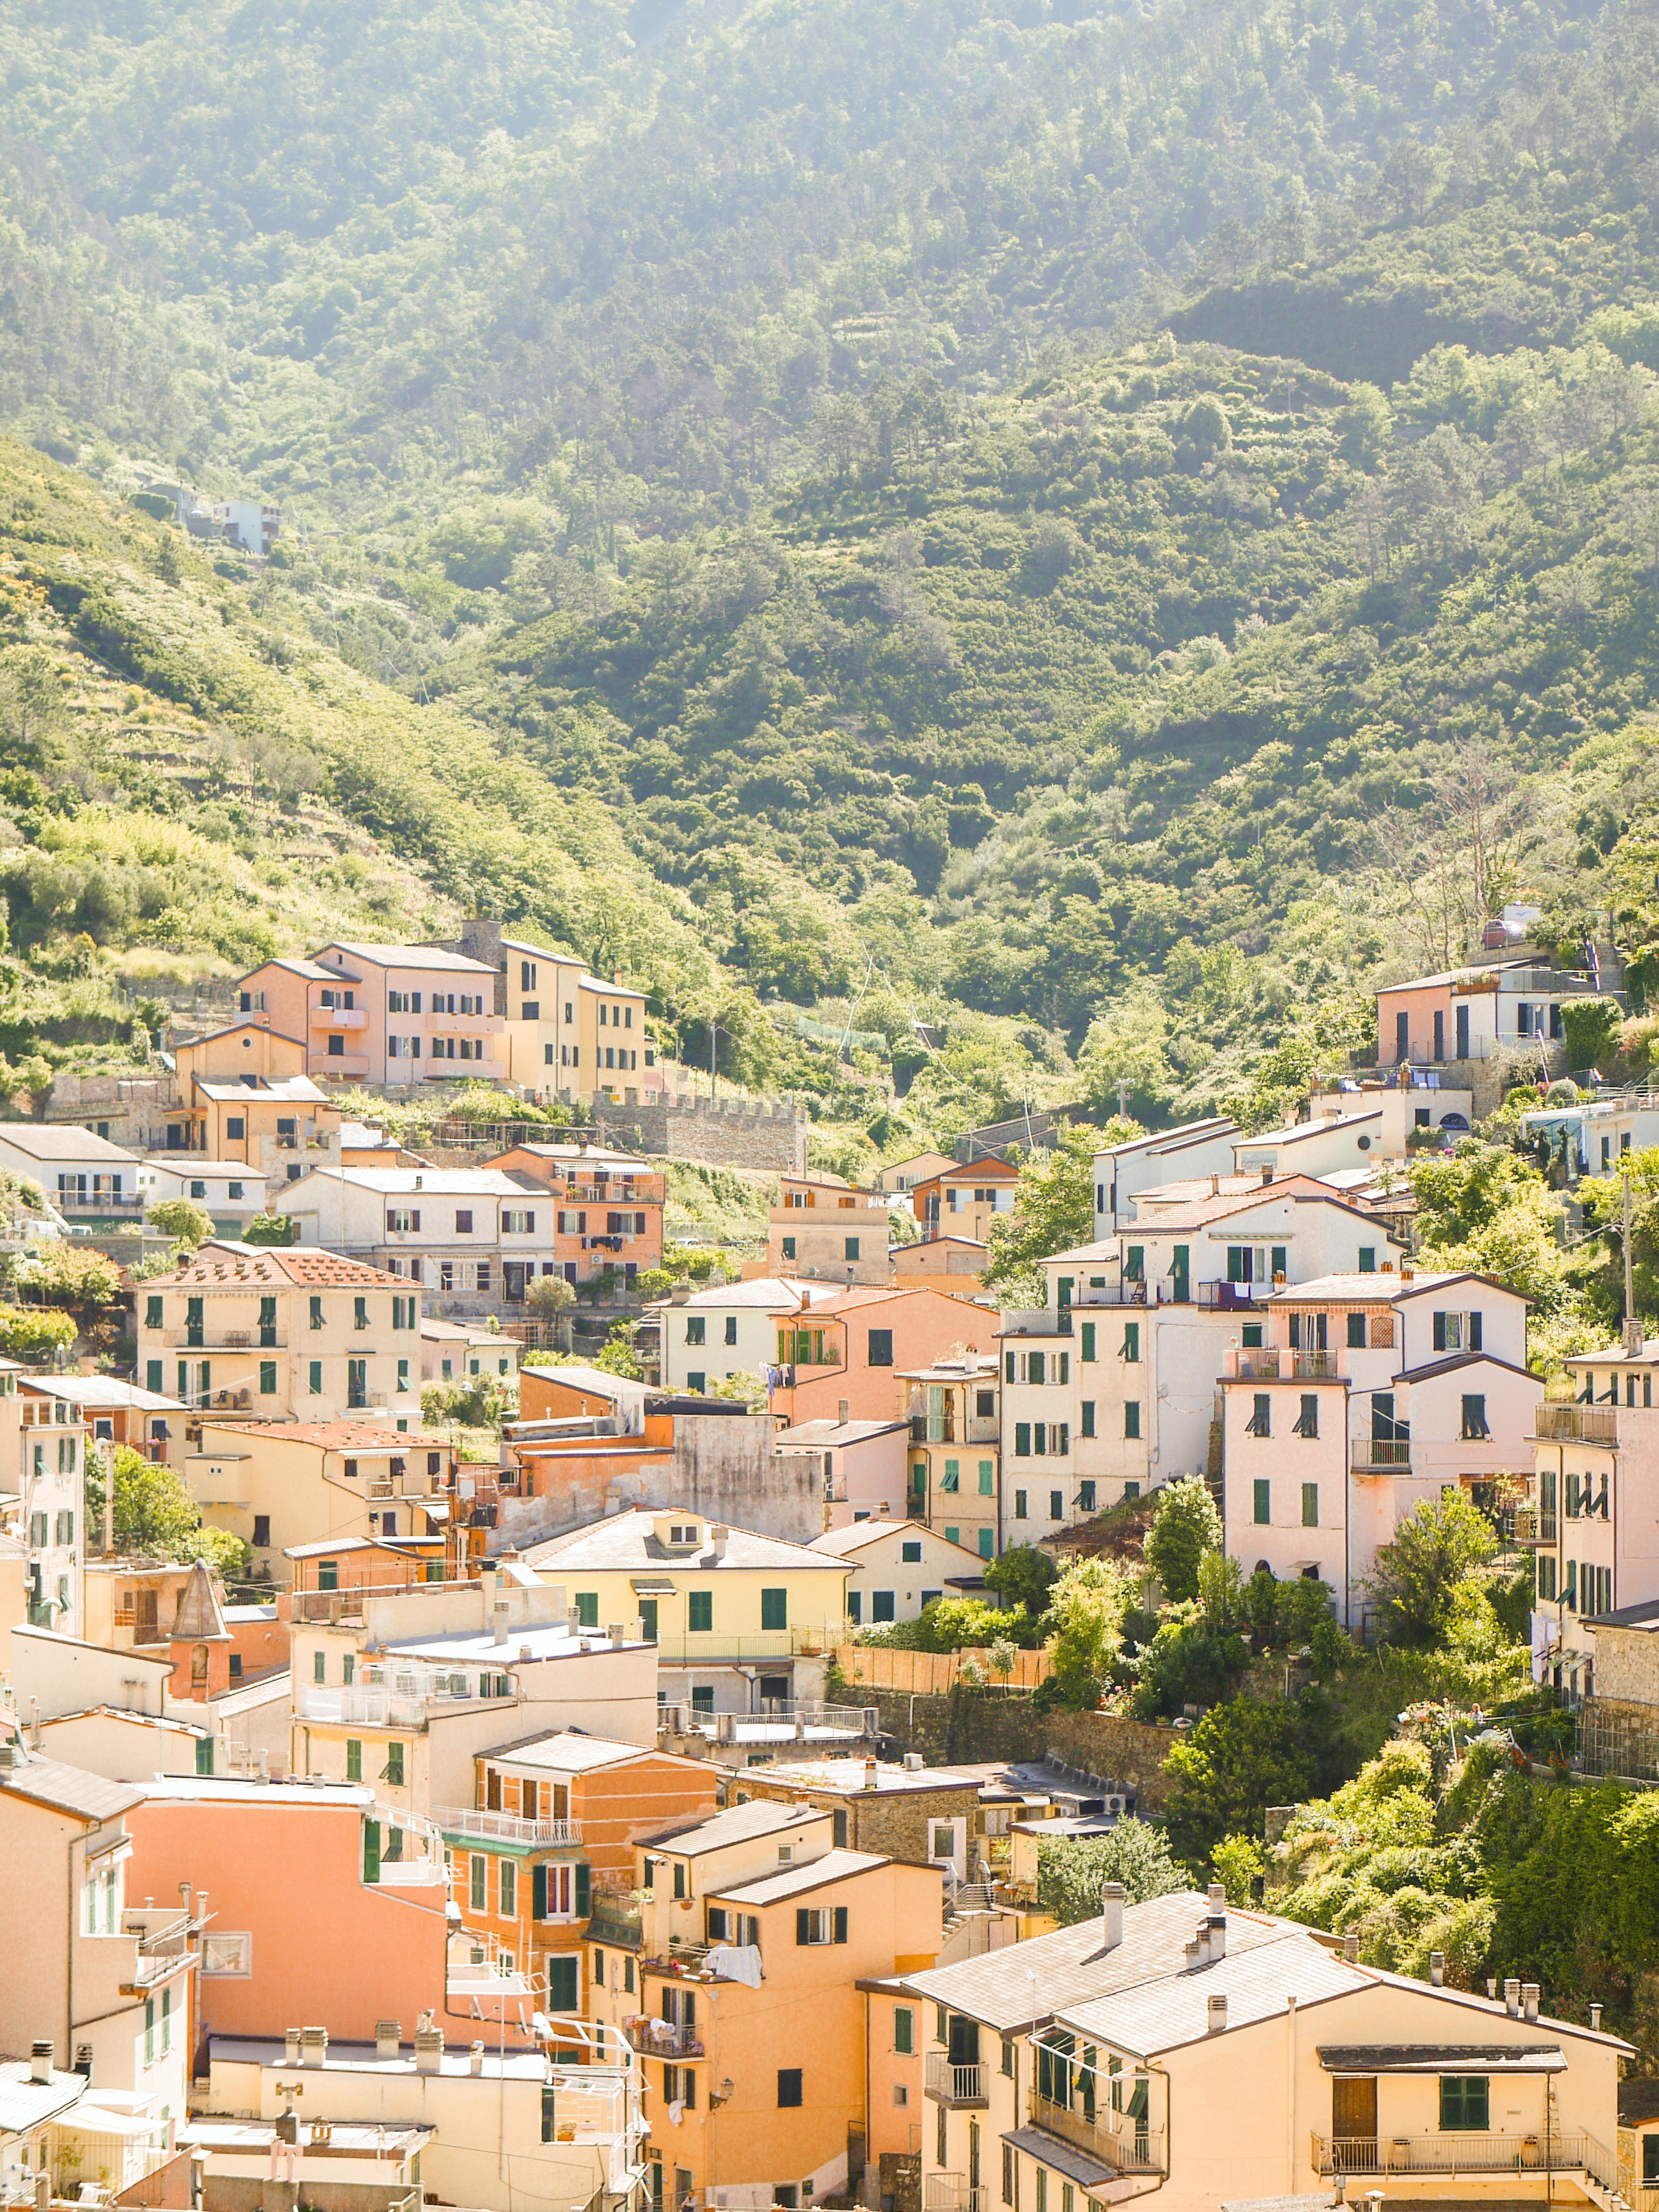 Brick and stone houses line the luscious hillside of Italy.